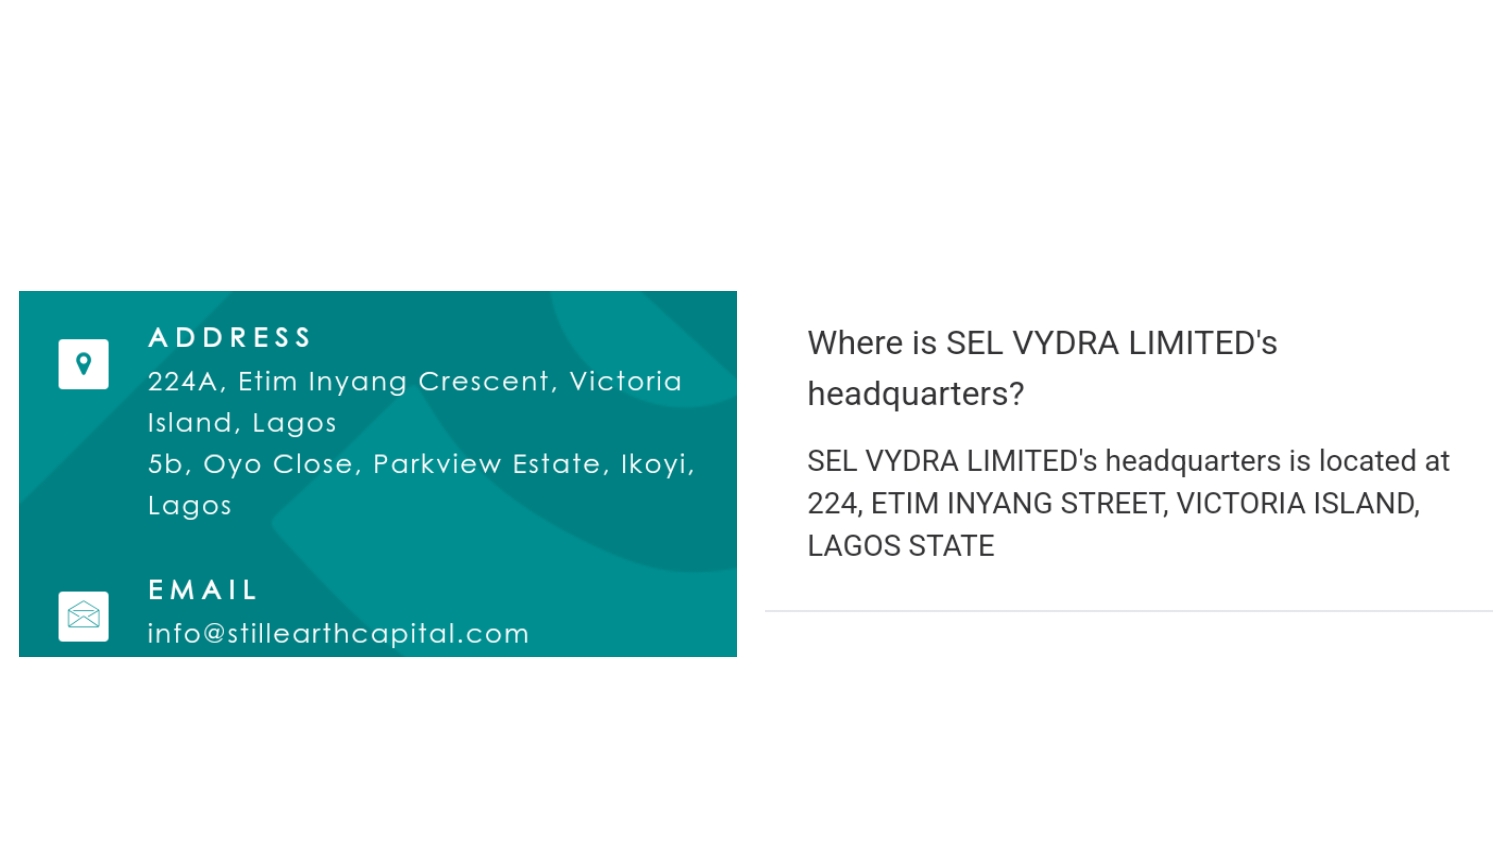 FL: Working Address of Still Earth Capital Finance Limited (SEL) and the working address of SEL-Vydra limited on Ngcheck, bearing resemblance. Subsequent companies registered in the name of Still Earth share either of the two addresses on the SEL Capital website.
